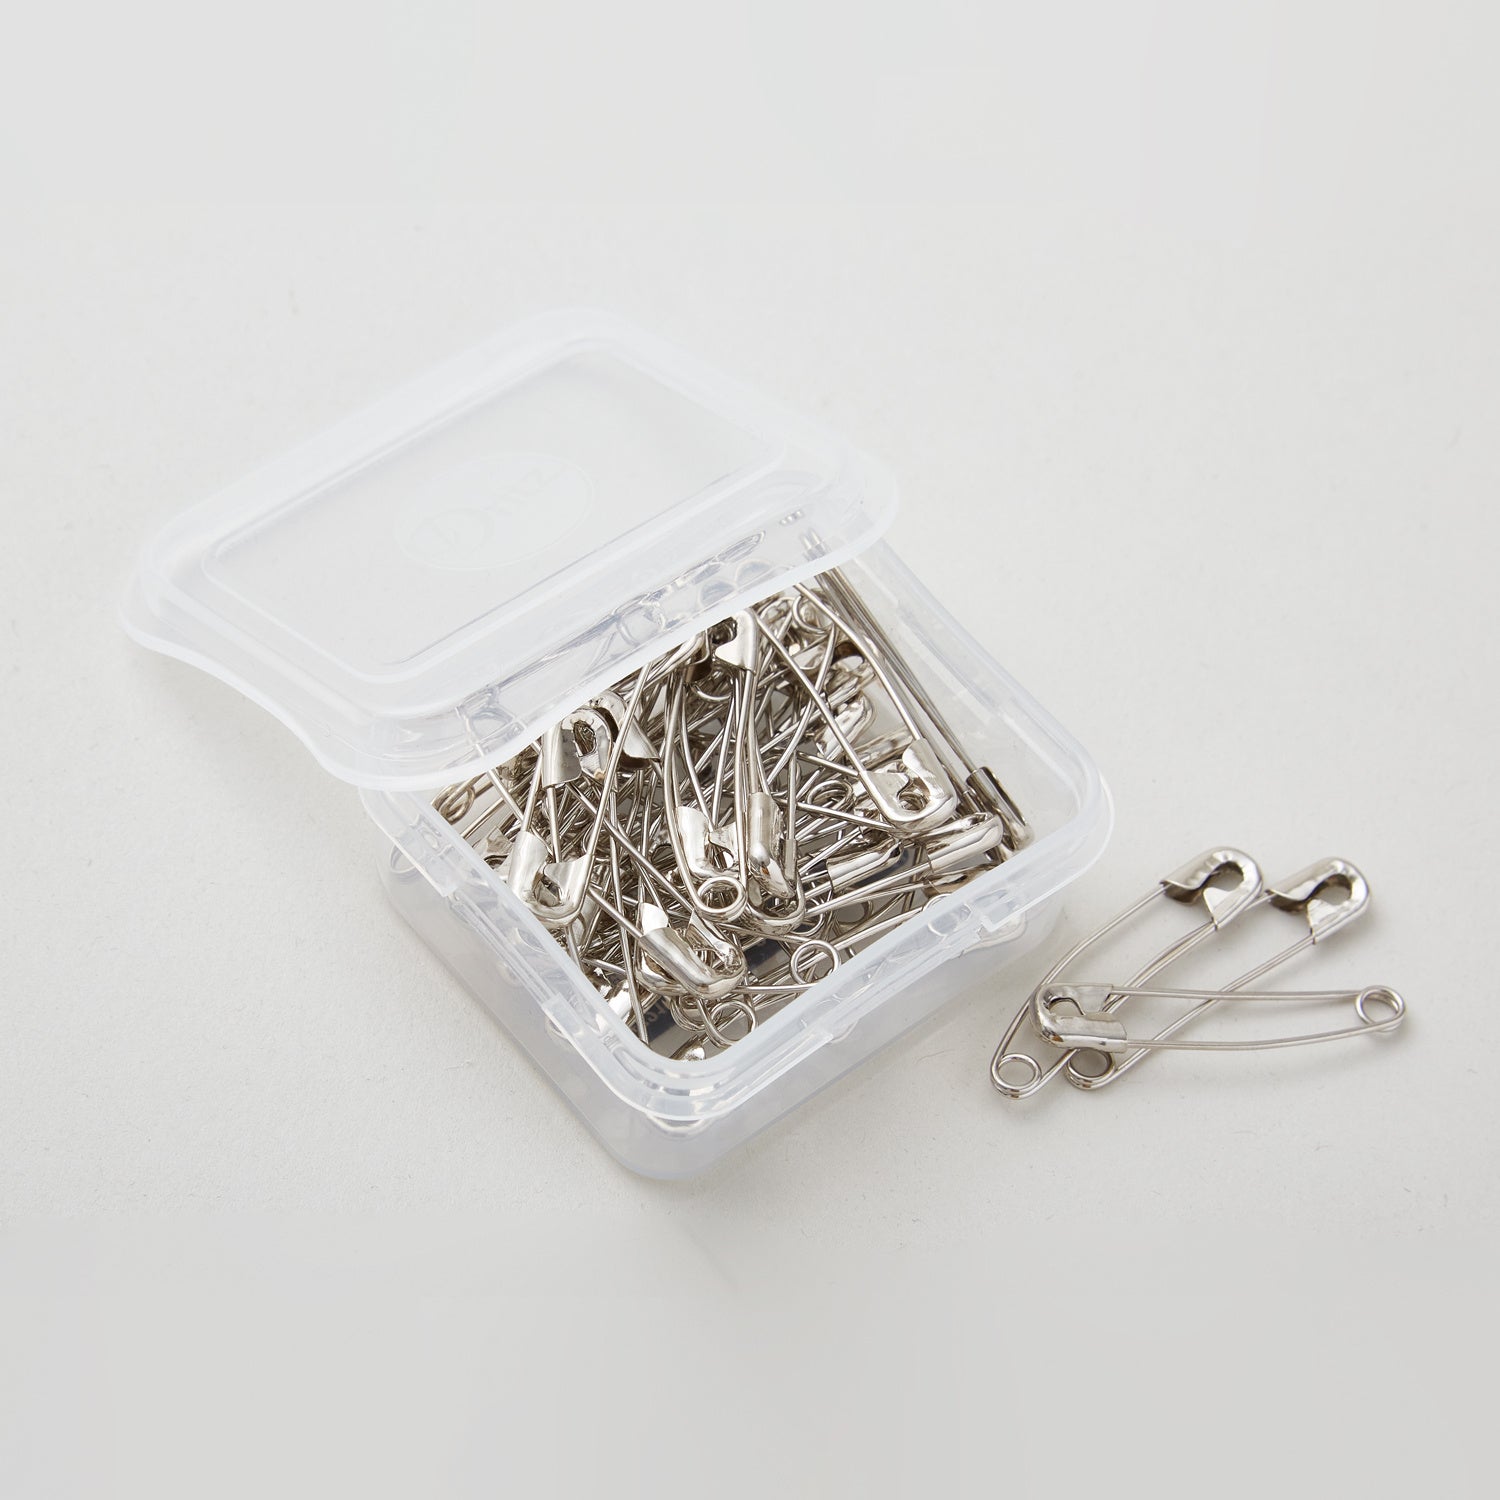 200pcs Safety Pins Stainless Steel Curved Pins Durable Curved Safety Pin for Quilting, Size: 3.8X0.7CM